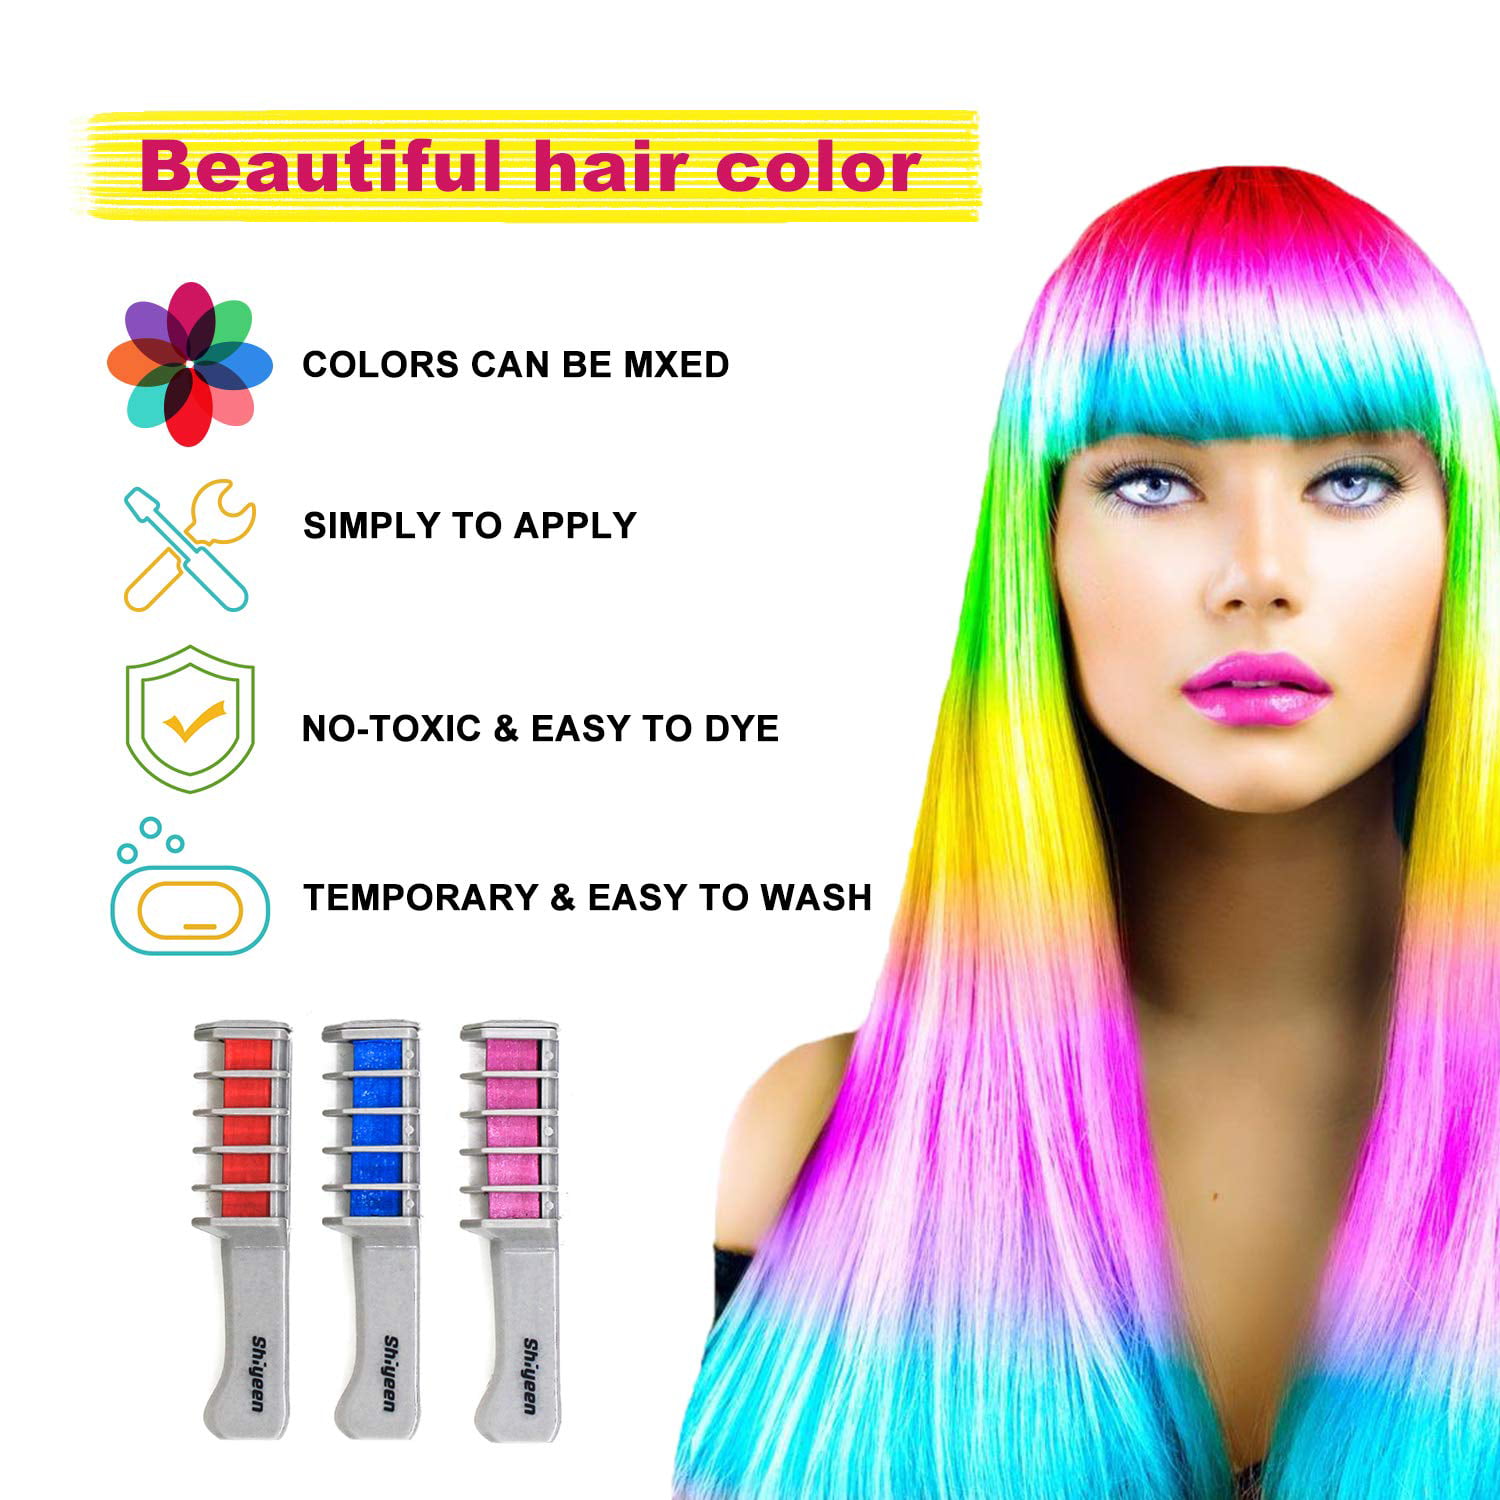 Hair Chalk Pinkiou Temporary Bright Hair Color Dye for Girls Kids, Washable Hair Chalk Set/Kit for Girls New Year Birthday Party Cosplay DIY - 8